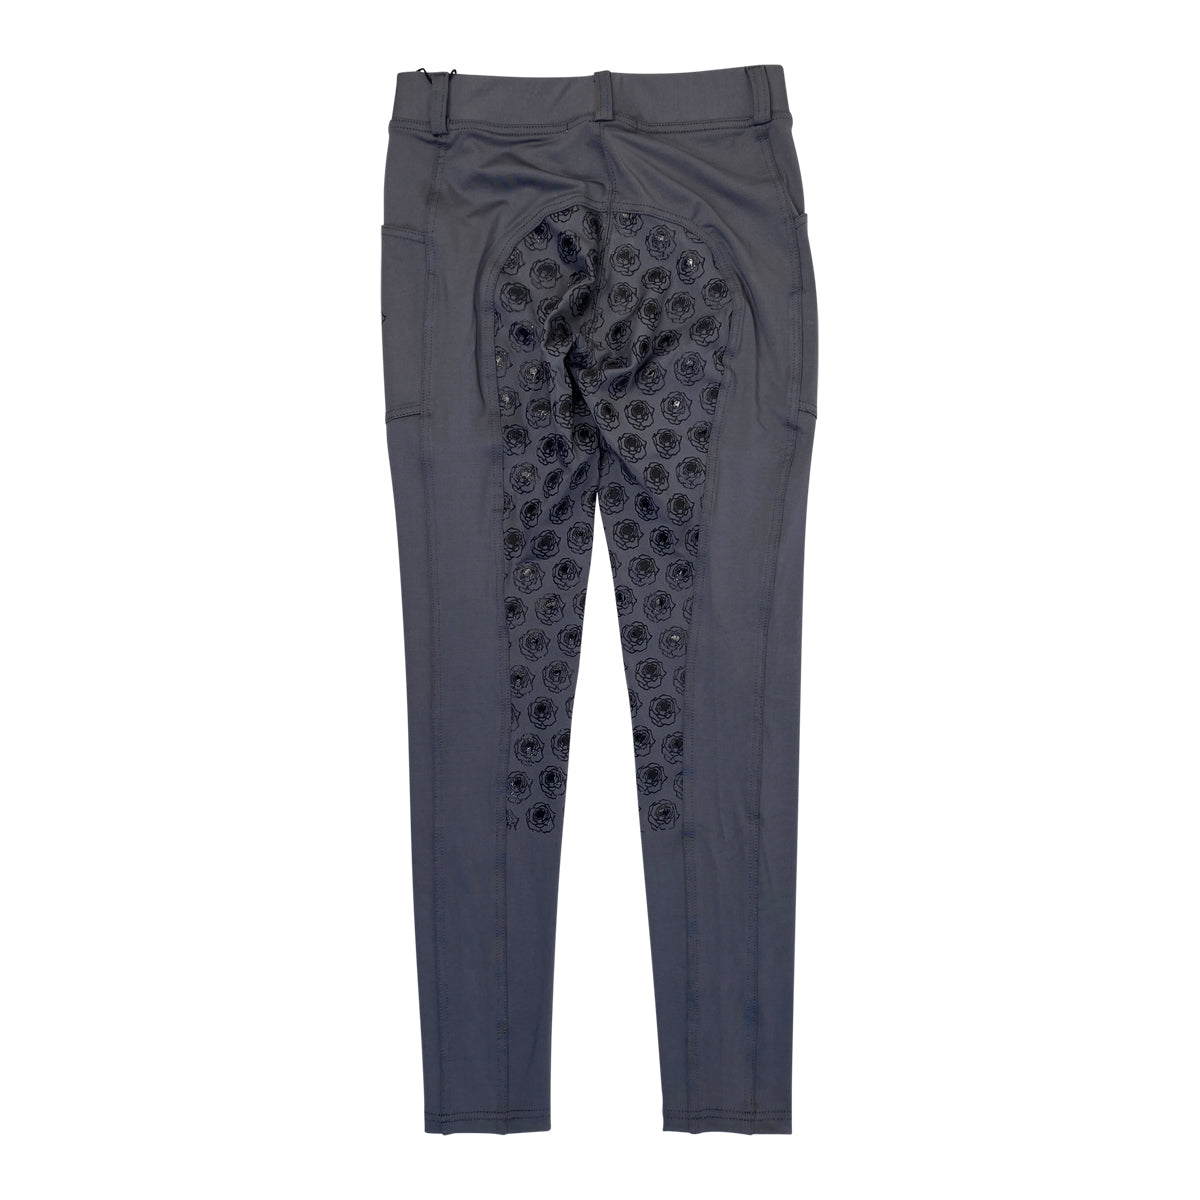 Hannah Childs 'Danielle' Breeches in Charcoal